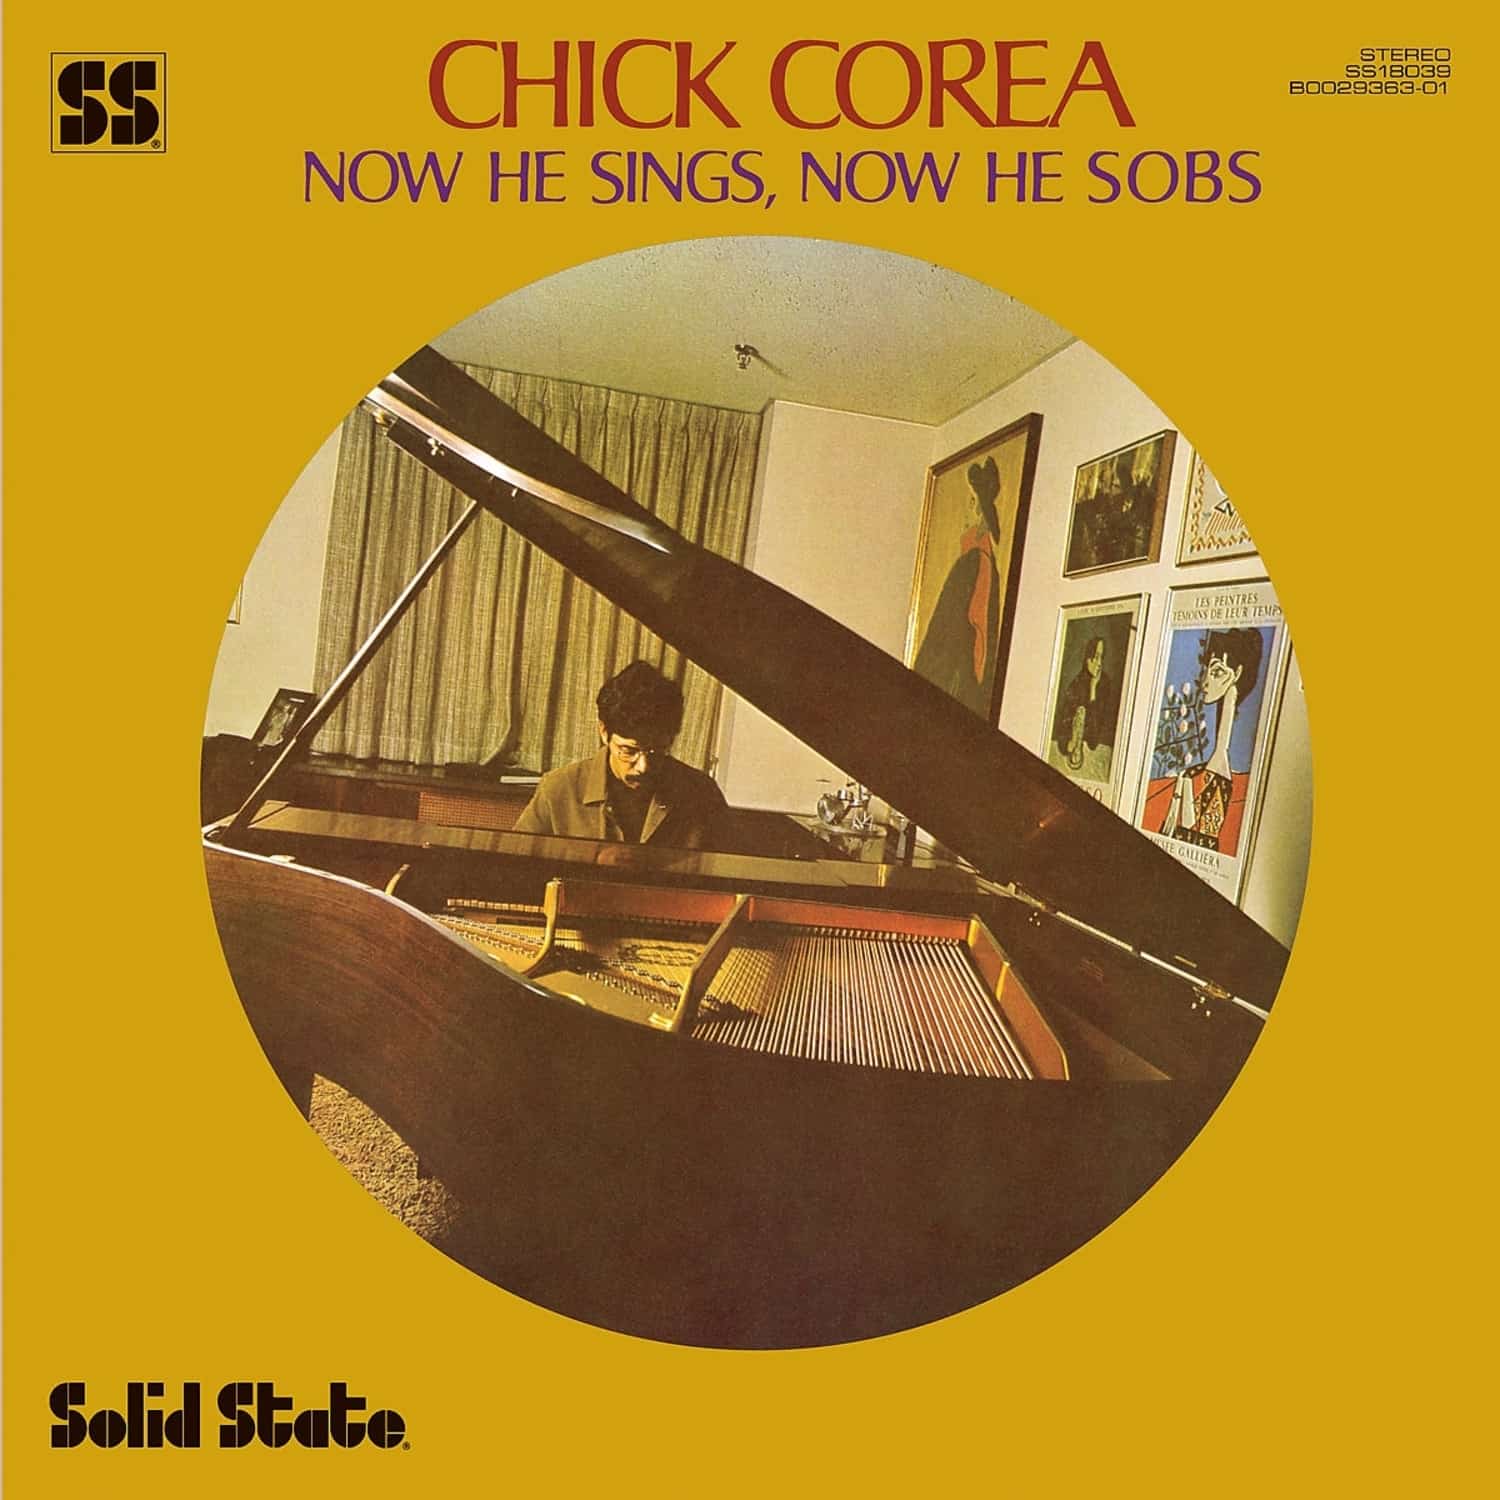 Chick Corea - NOW HE SINGS,NOW HE SOBS 